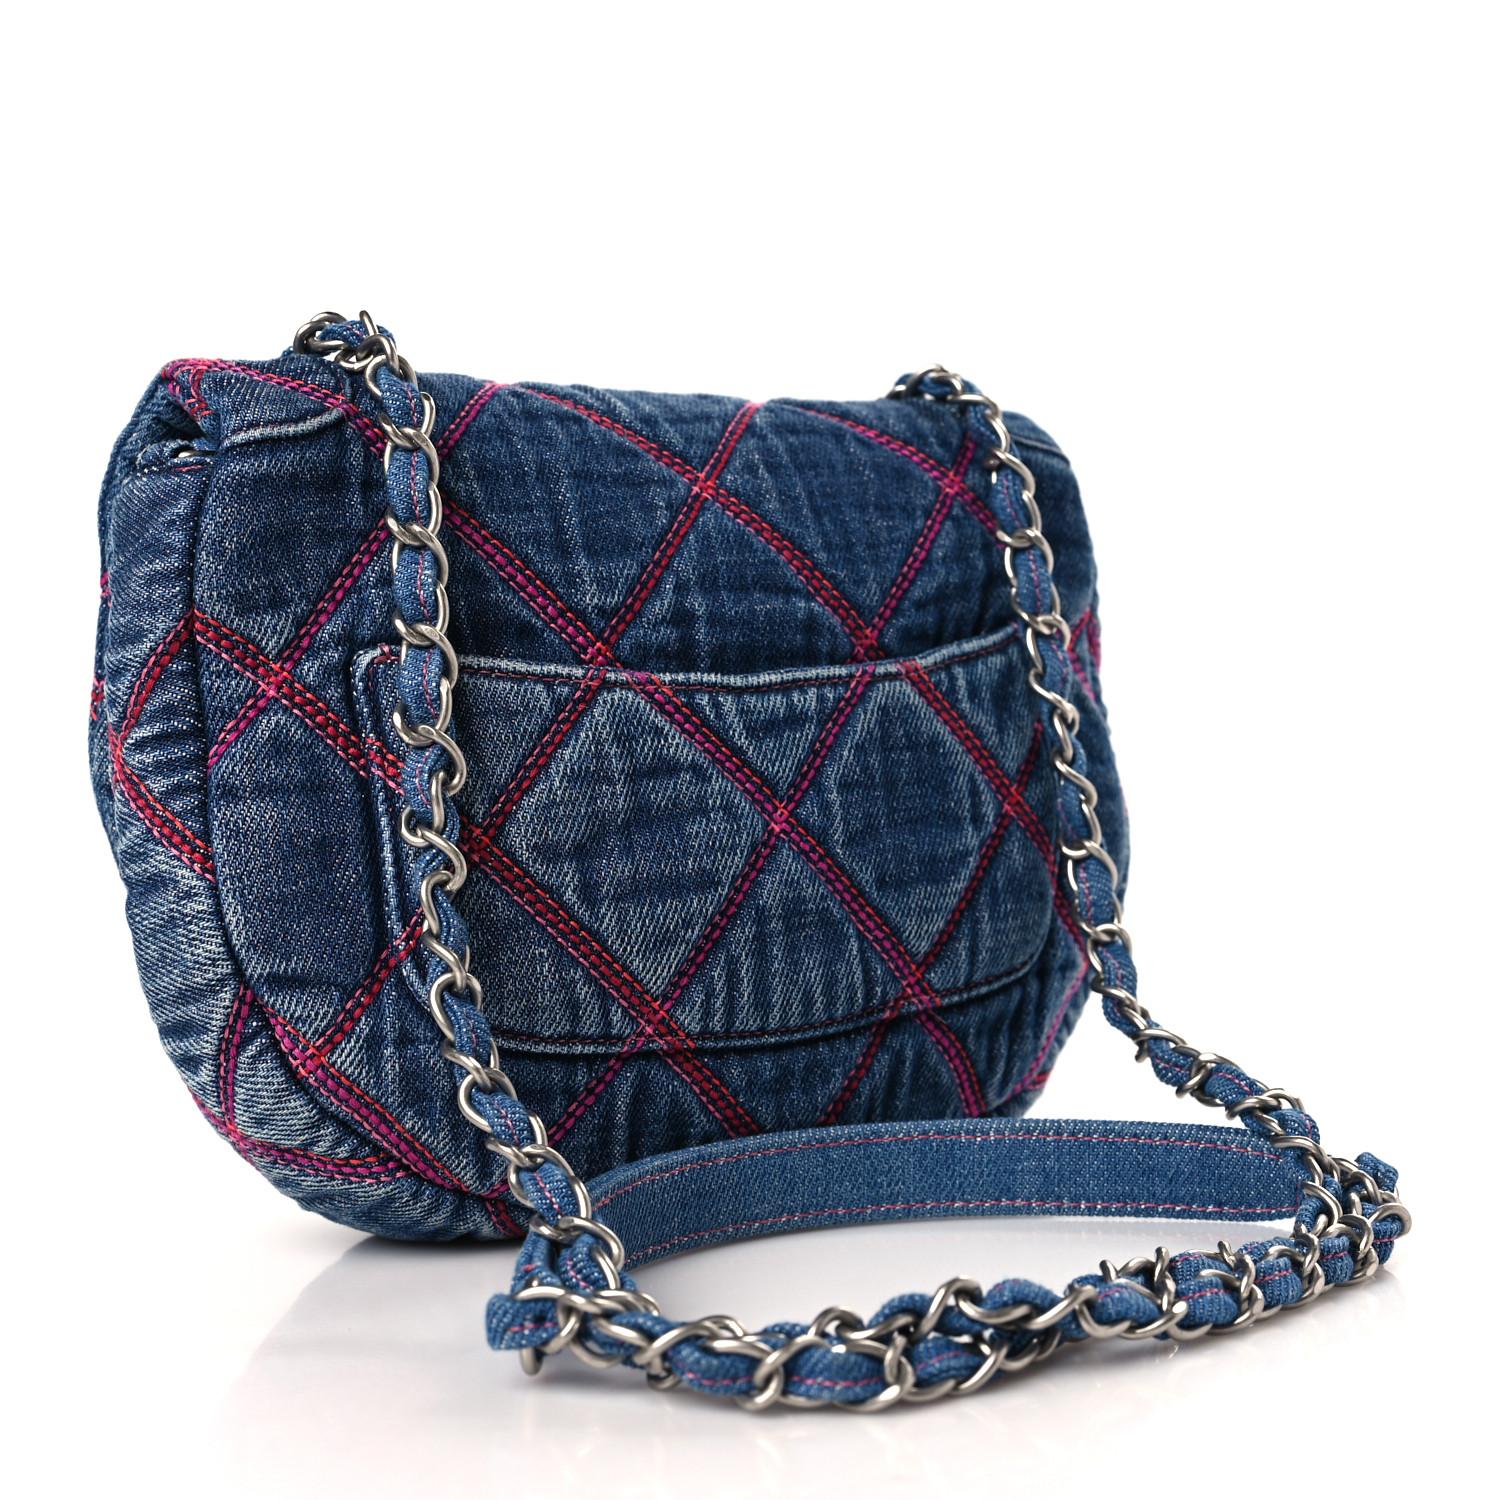 This messenger bag is constructed of diamond quilted blue denim fabric. The bag features silver chain link shoulder straps threaded and a frontal flap with a silver Chanel CC turn lock closure. The flap opens to a fabric interior with